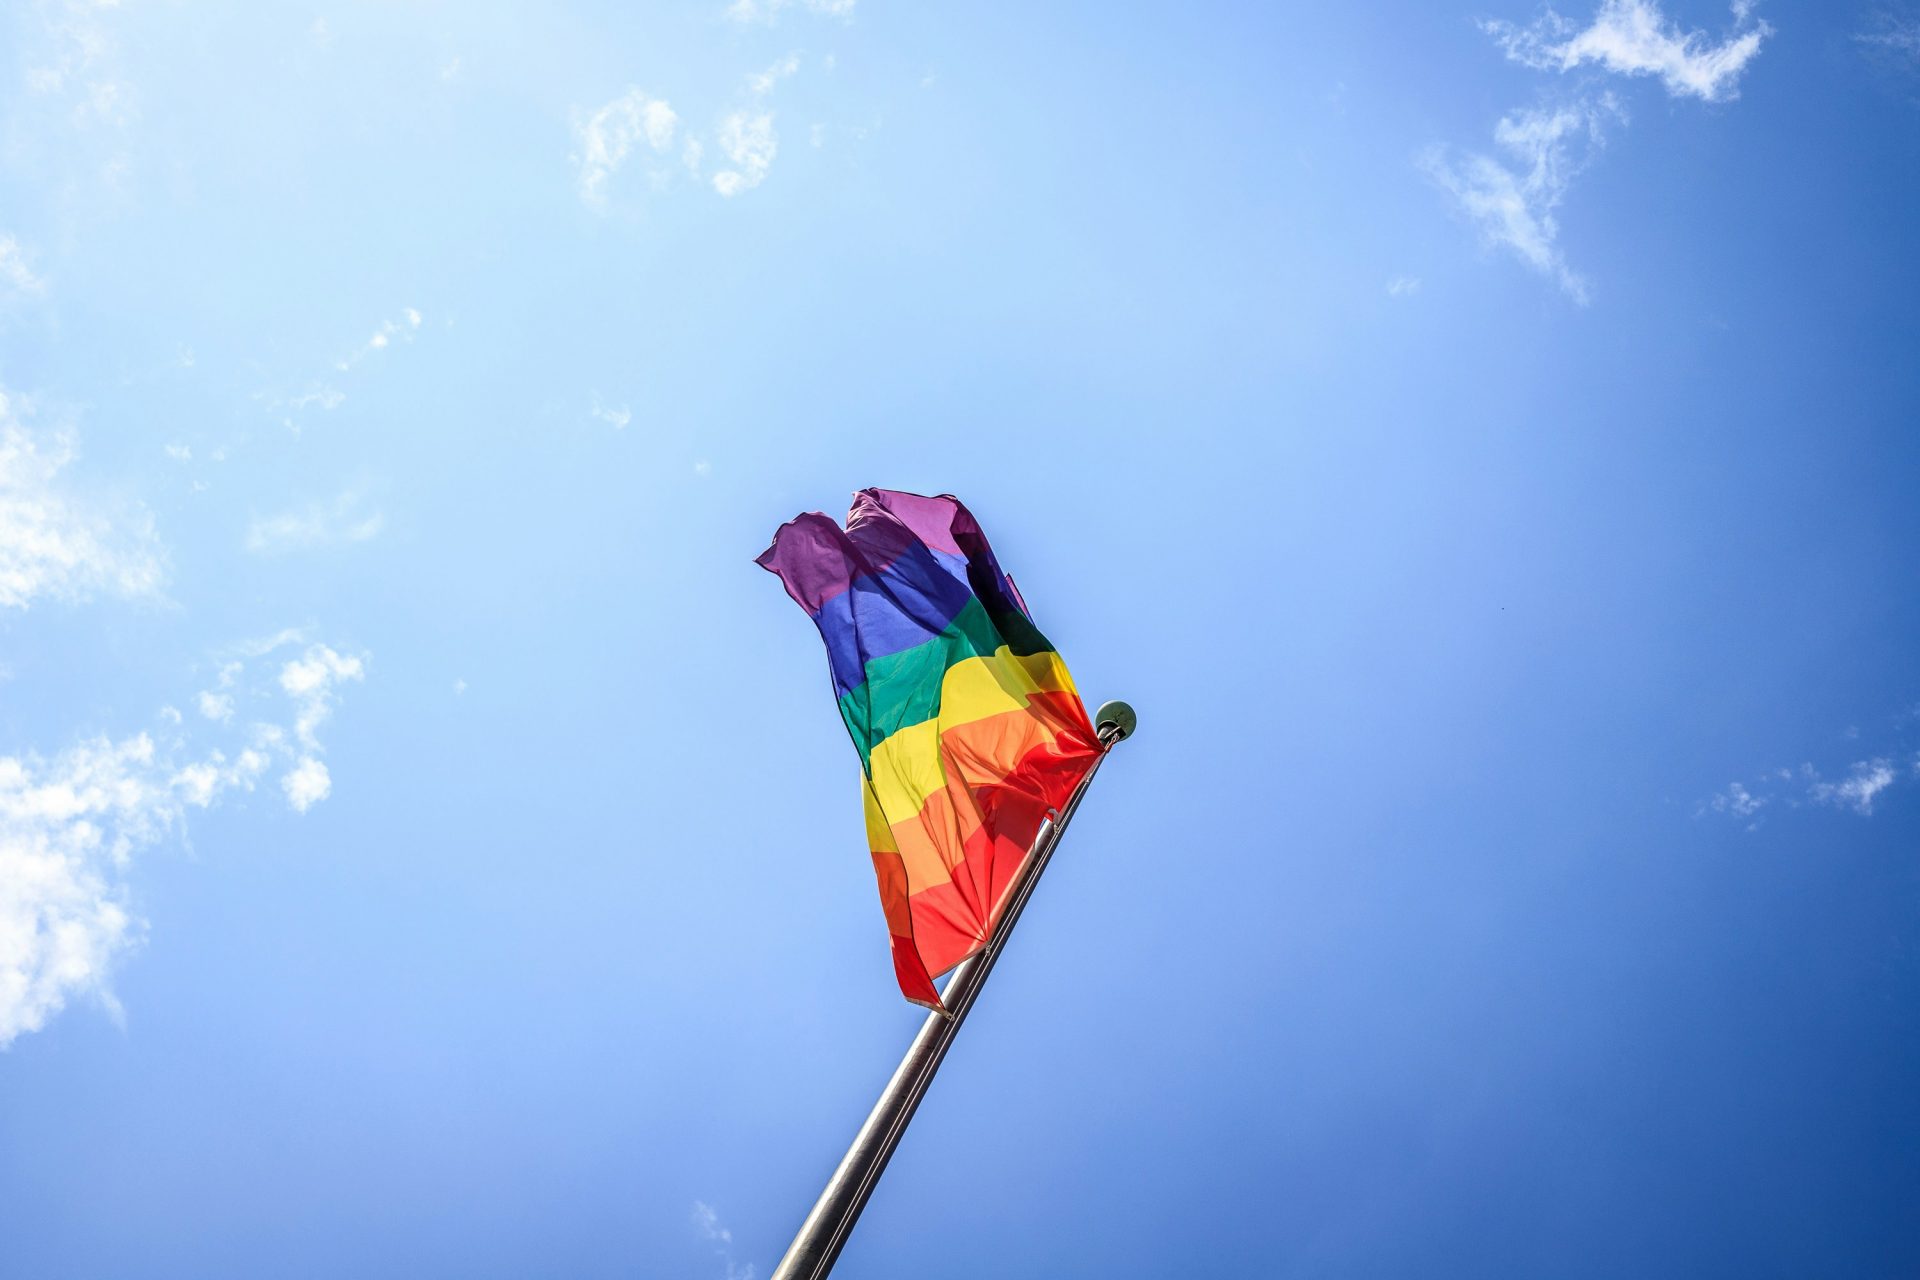 <p>According to Politico, the State Department warns that "US citizens should remain alert in tourist areas and places popular with LGBTQ+ people."</p> <p>Image: Tim Bieler / Unplash</p>